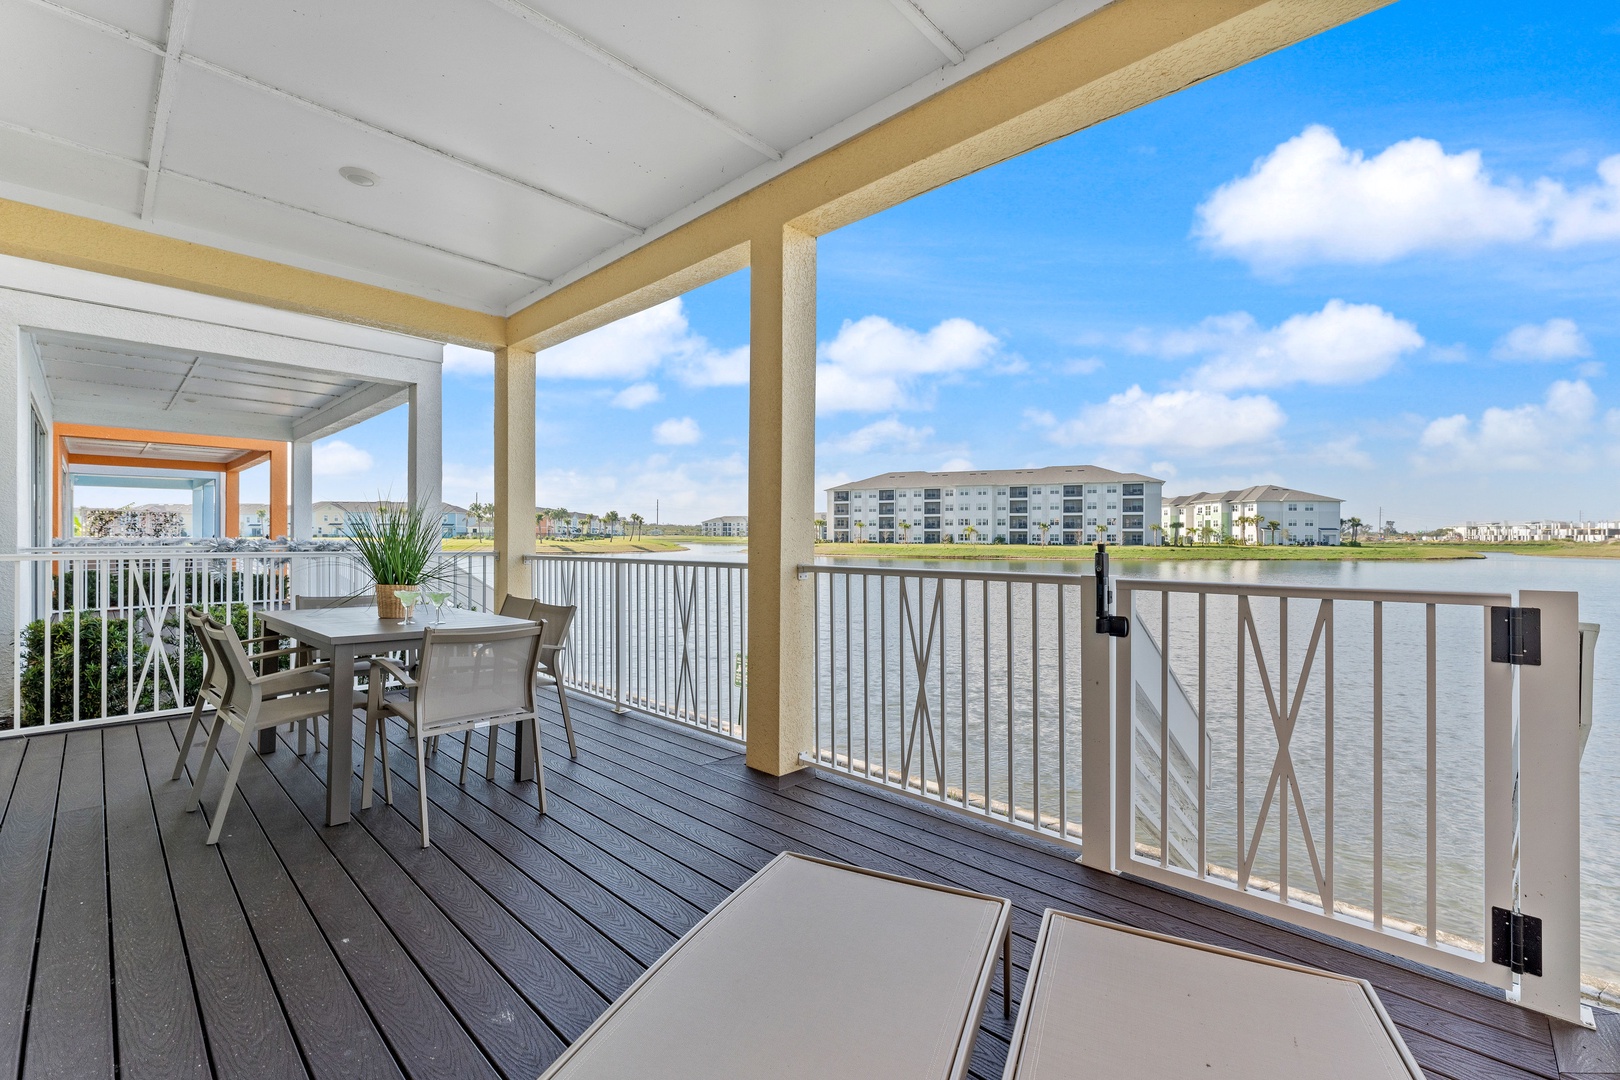 Lounge with waterfront views or dine al fresco on the deck